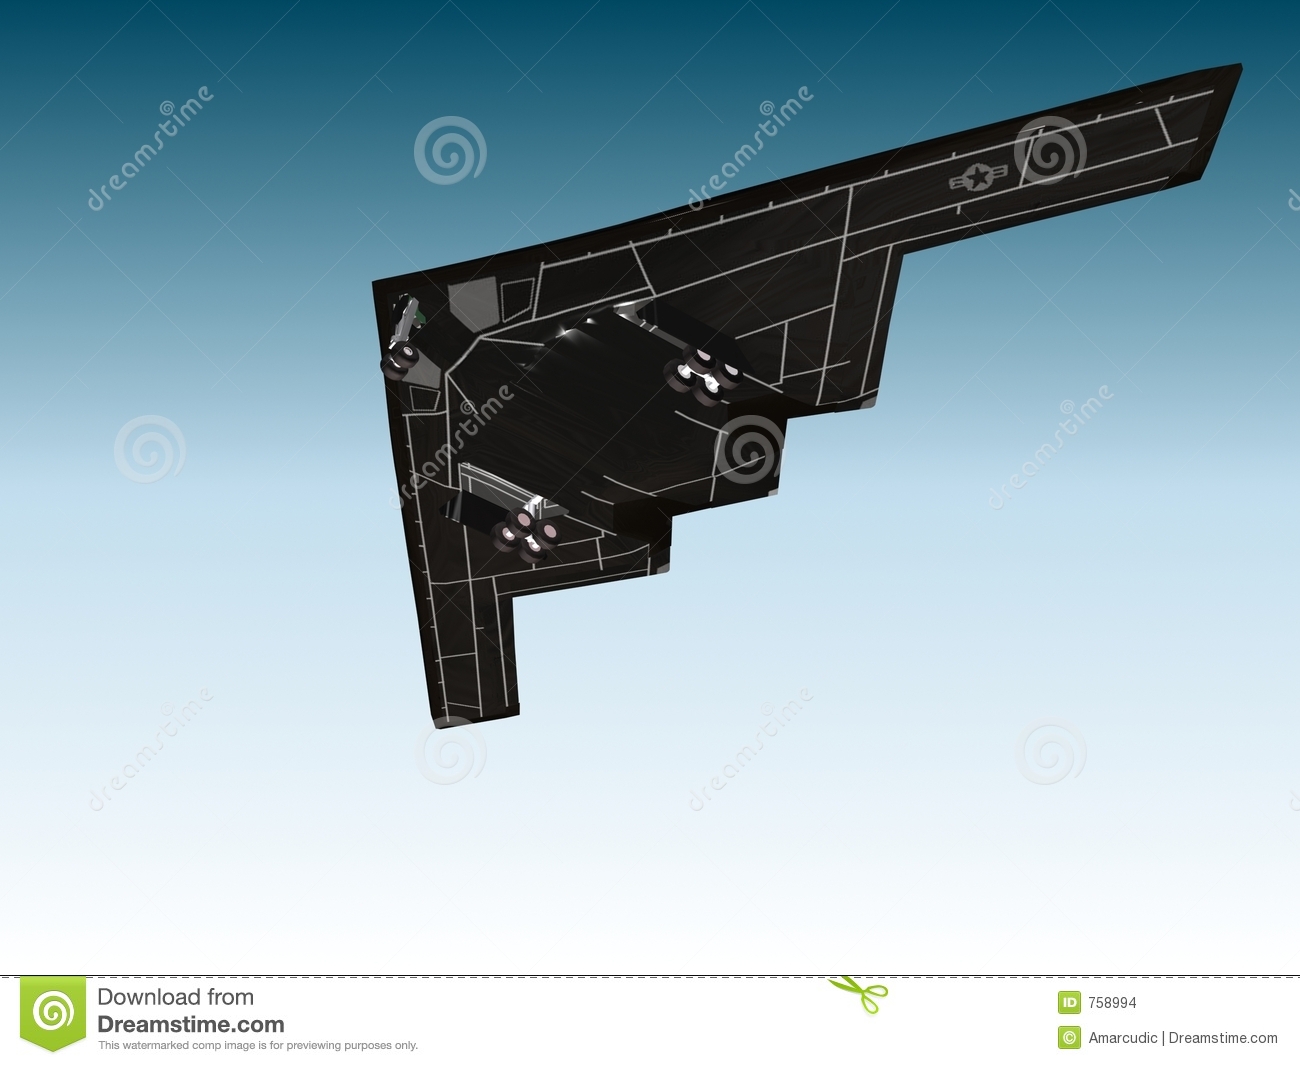 B2 Fighter Stock Images   Image  758994